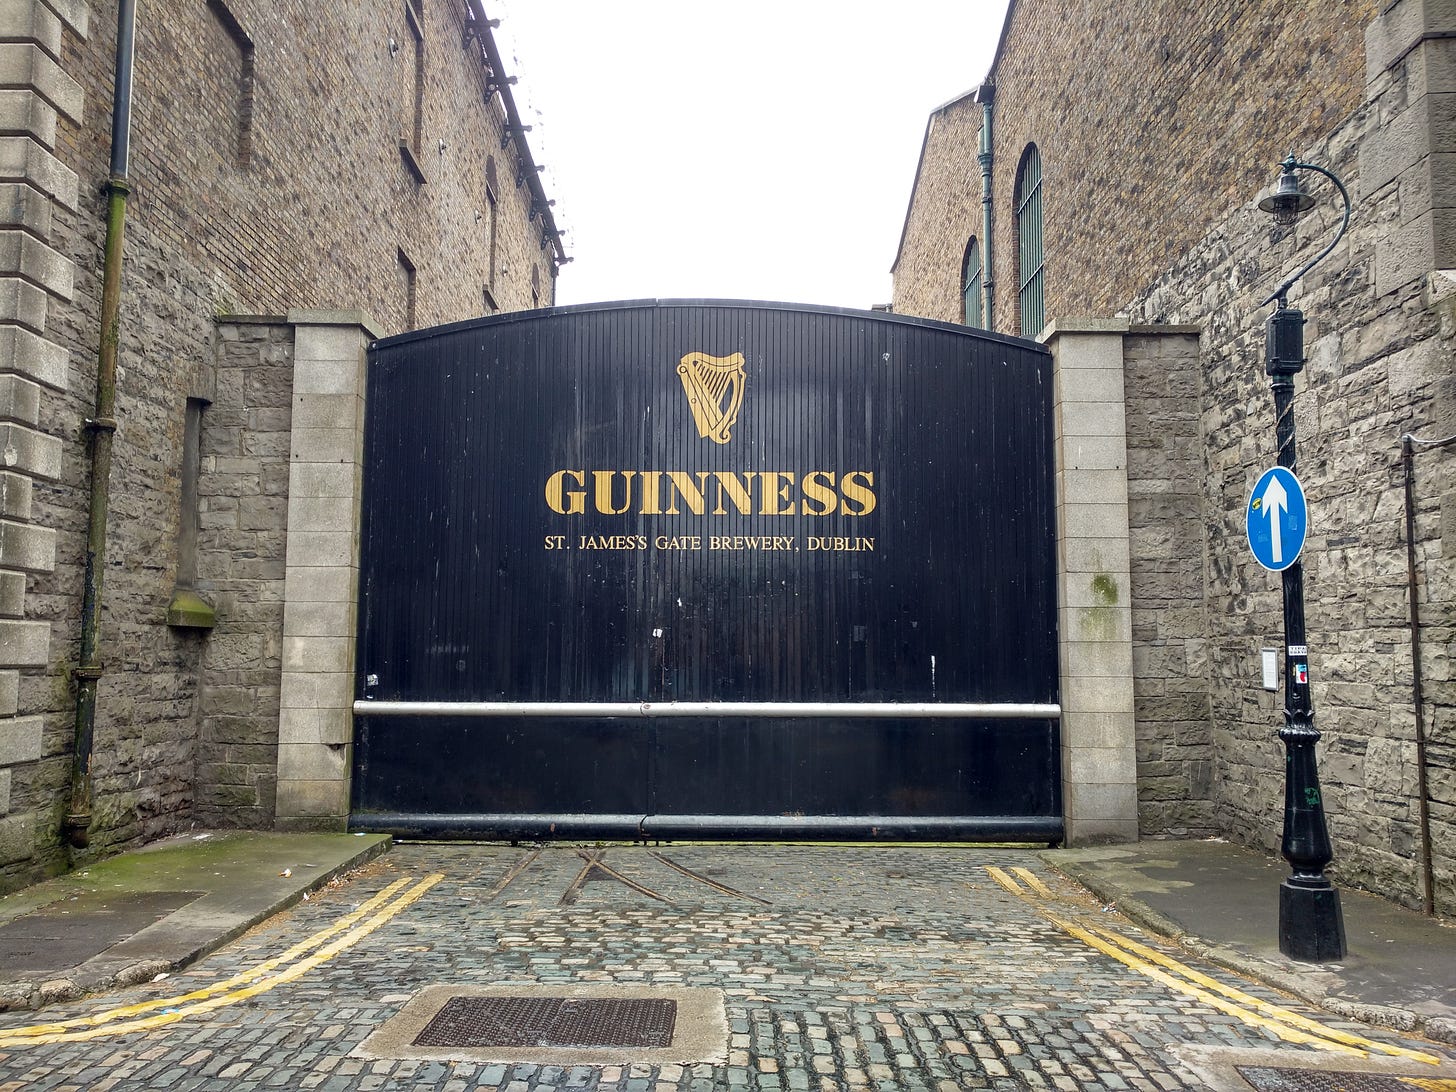 The iconic Guinness Storehouse gates are painted black with gold lettering. Surrounded by cobblestones, they're a tourist landmark.